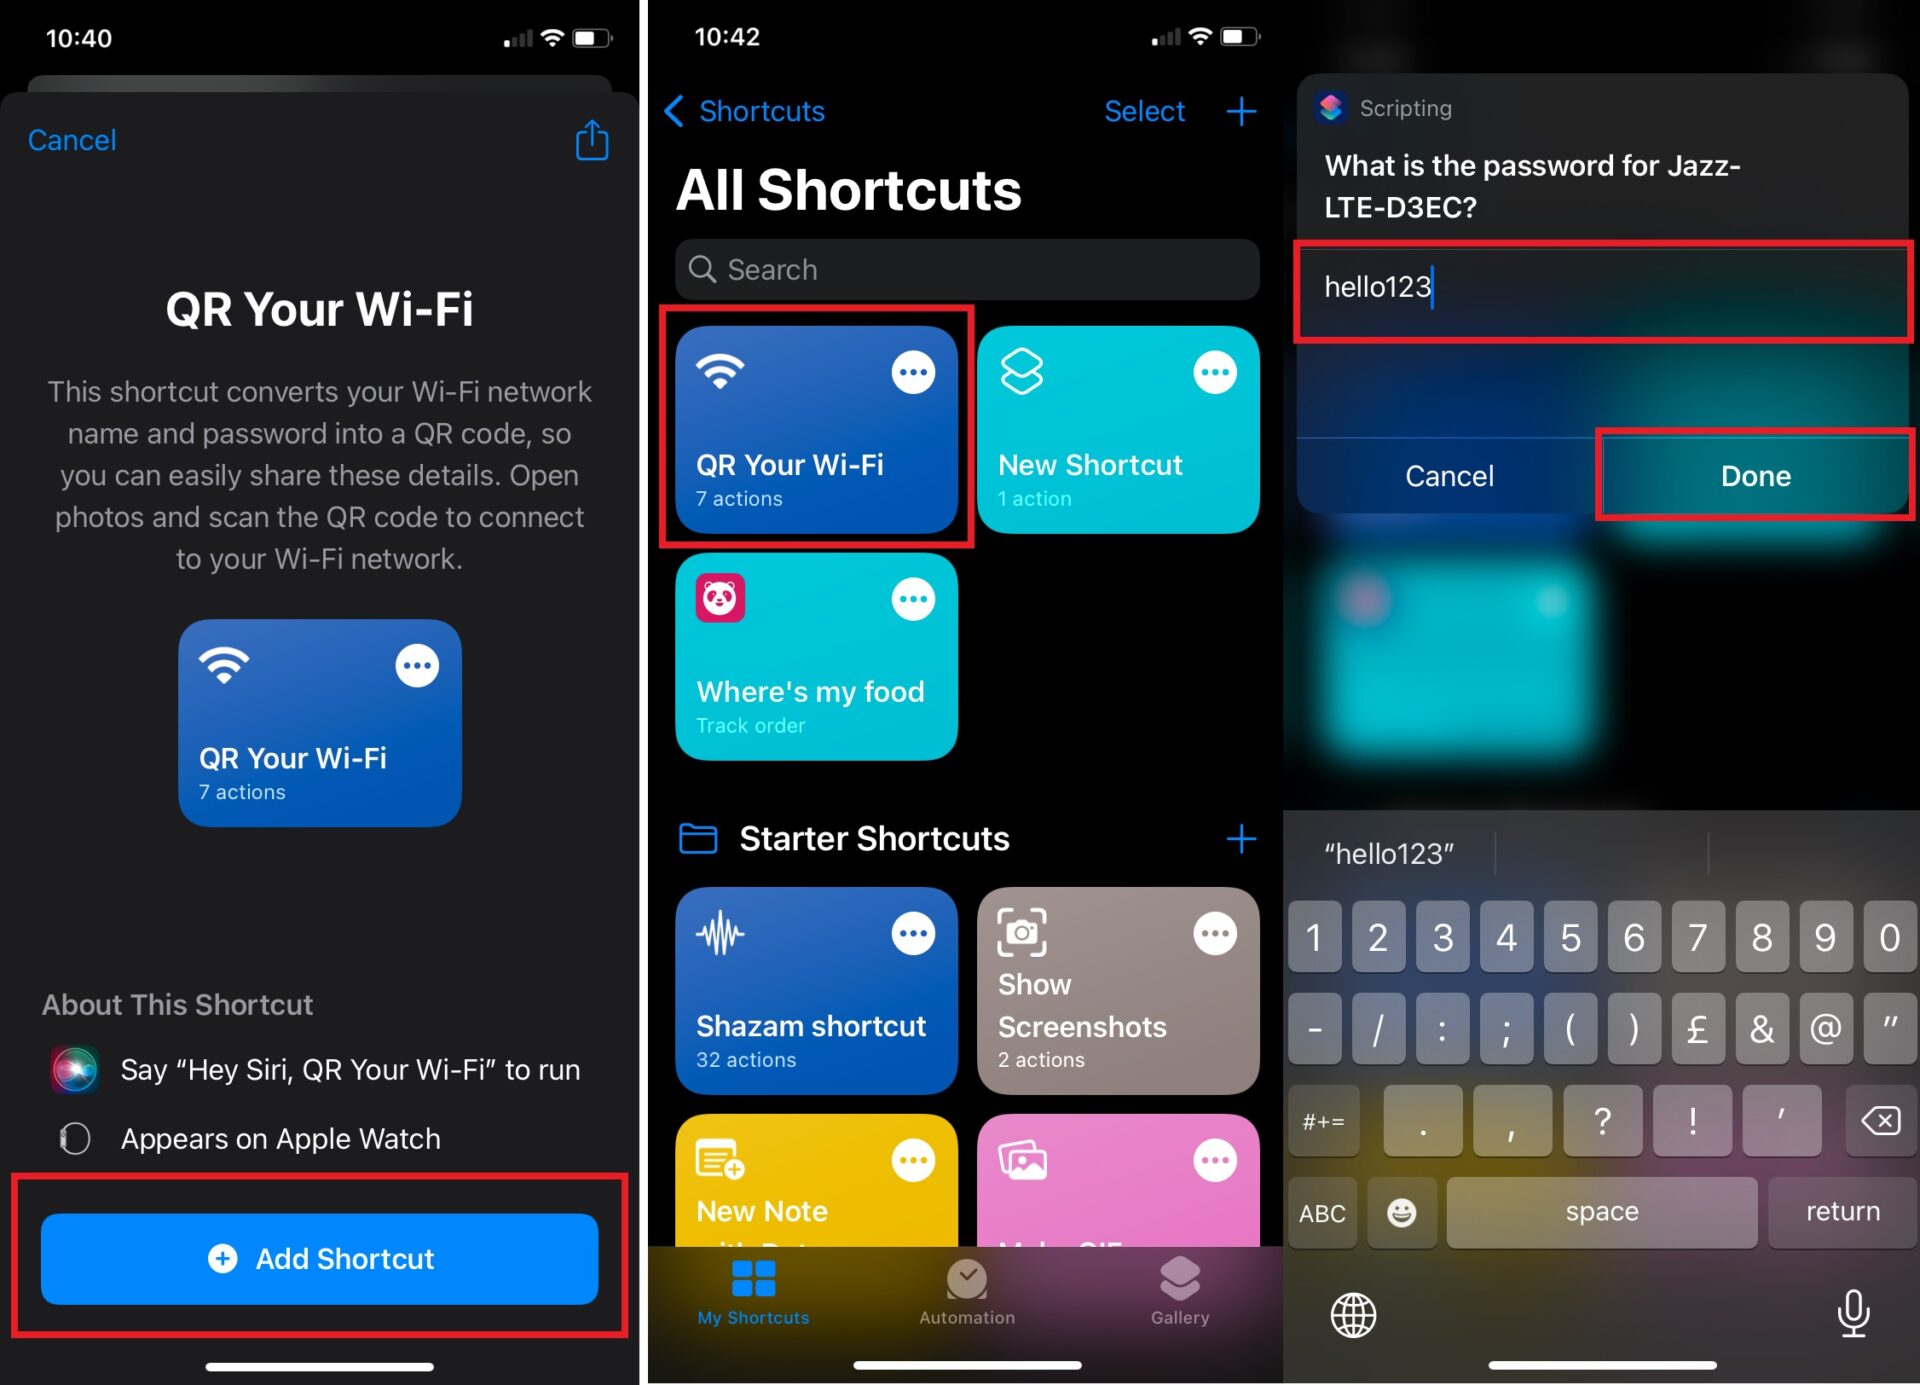 Set Up QR Your WiFi shortcut and enter WiFi password